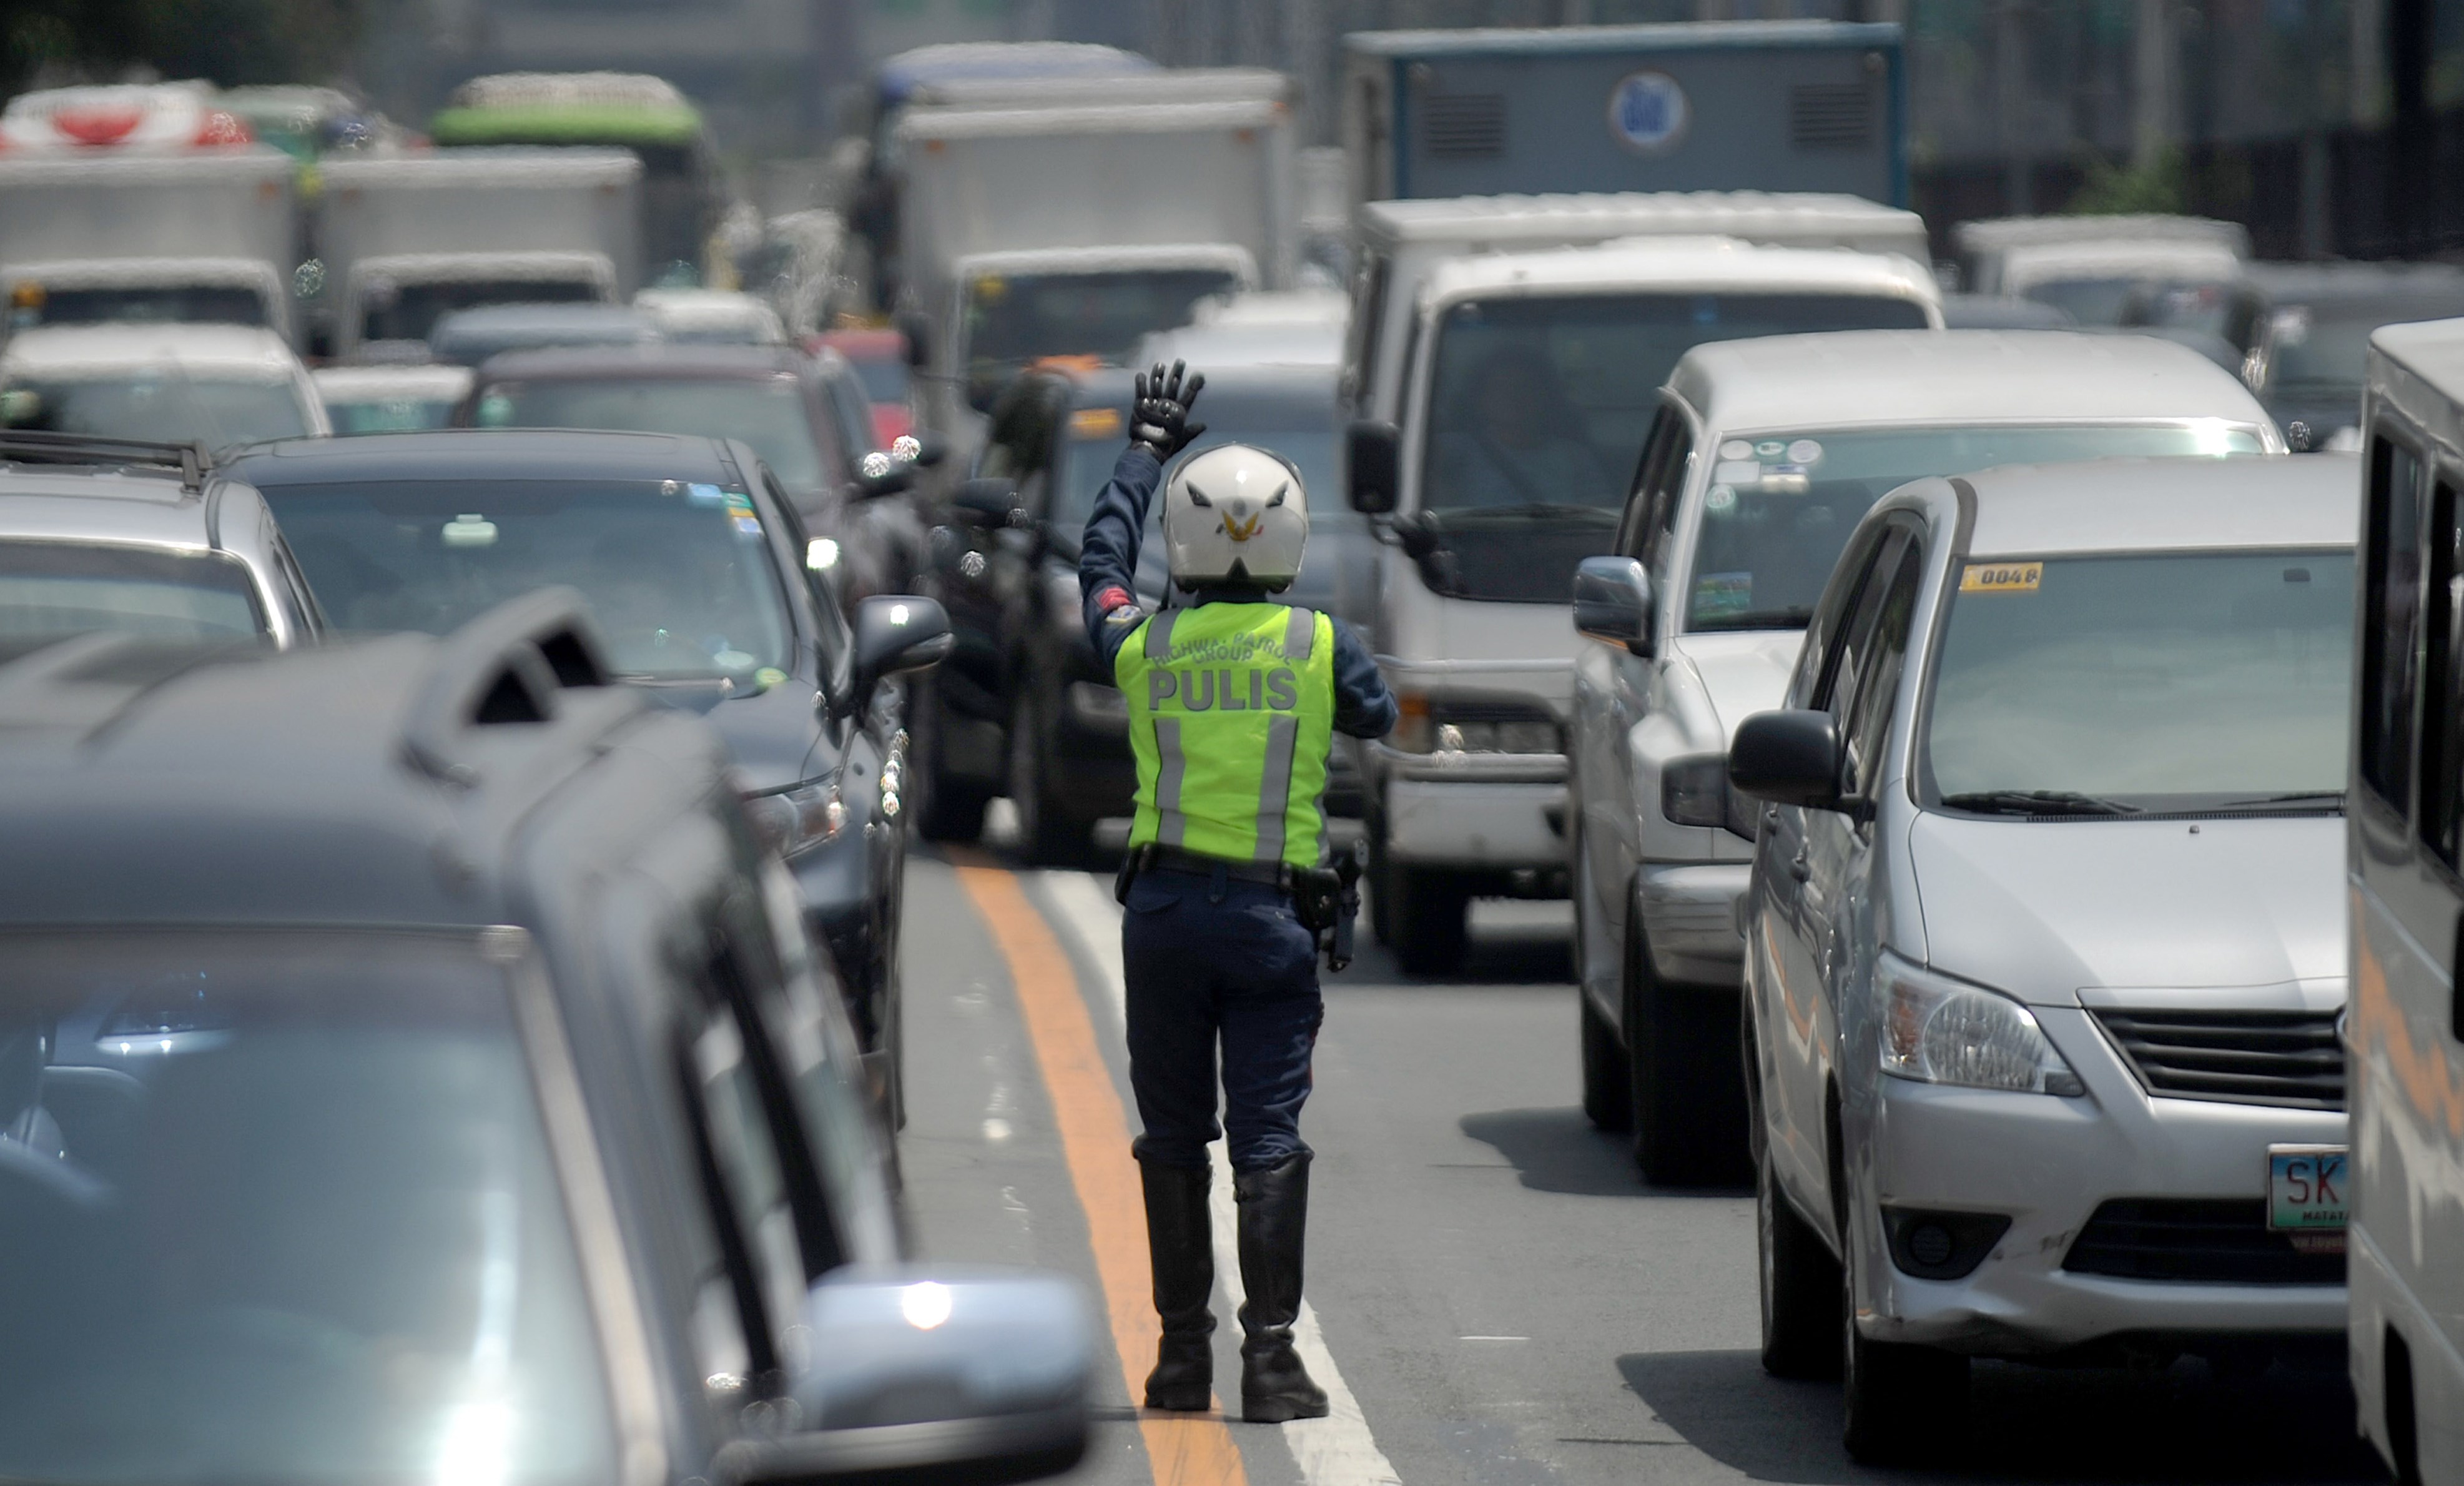 A police officer controls traffic at Epifanio de los Santos Avenue, popularly known as EDSA, in Manila on Sept. 8, 2015 (Jay Directo—AFP/Getty Images)